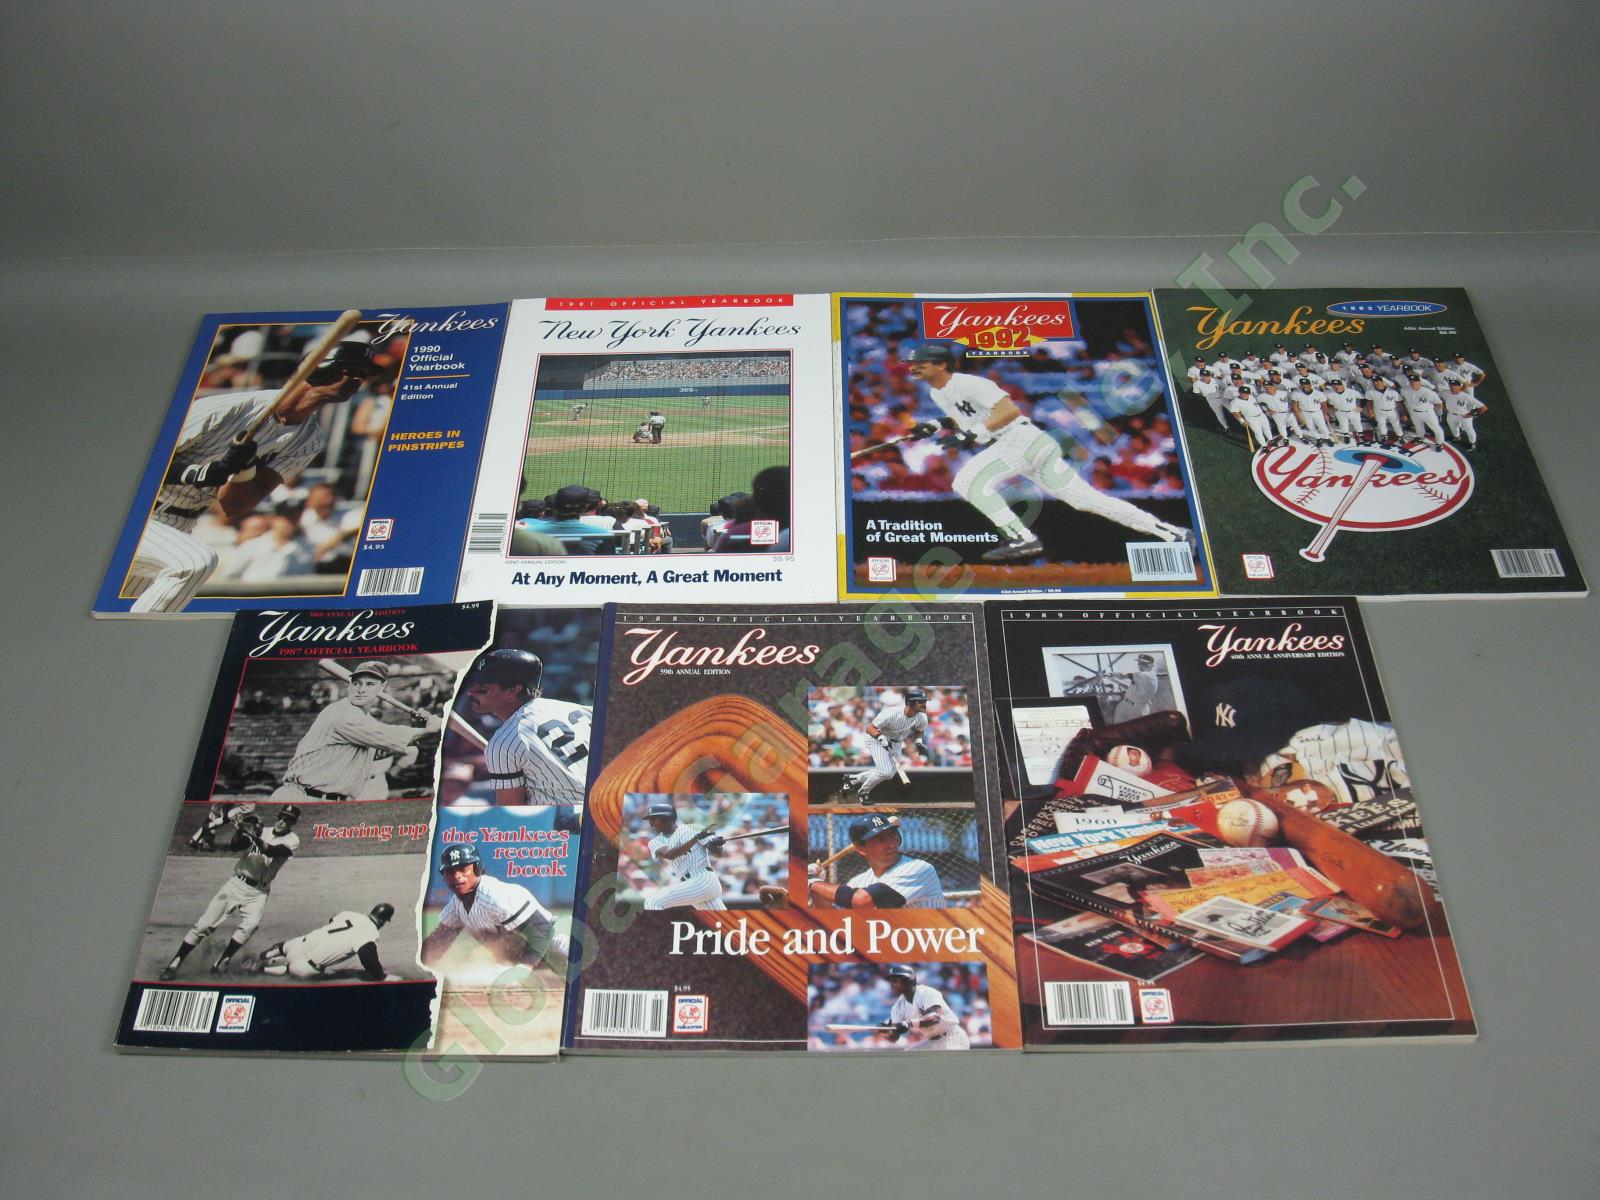 41 NY Yankees Yearbooks Lot Every One From 1967-2007 + 2 Scorecards + 3 Programs 6